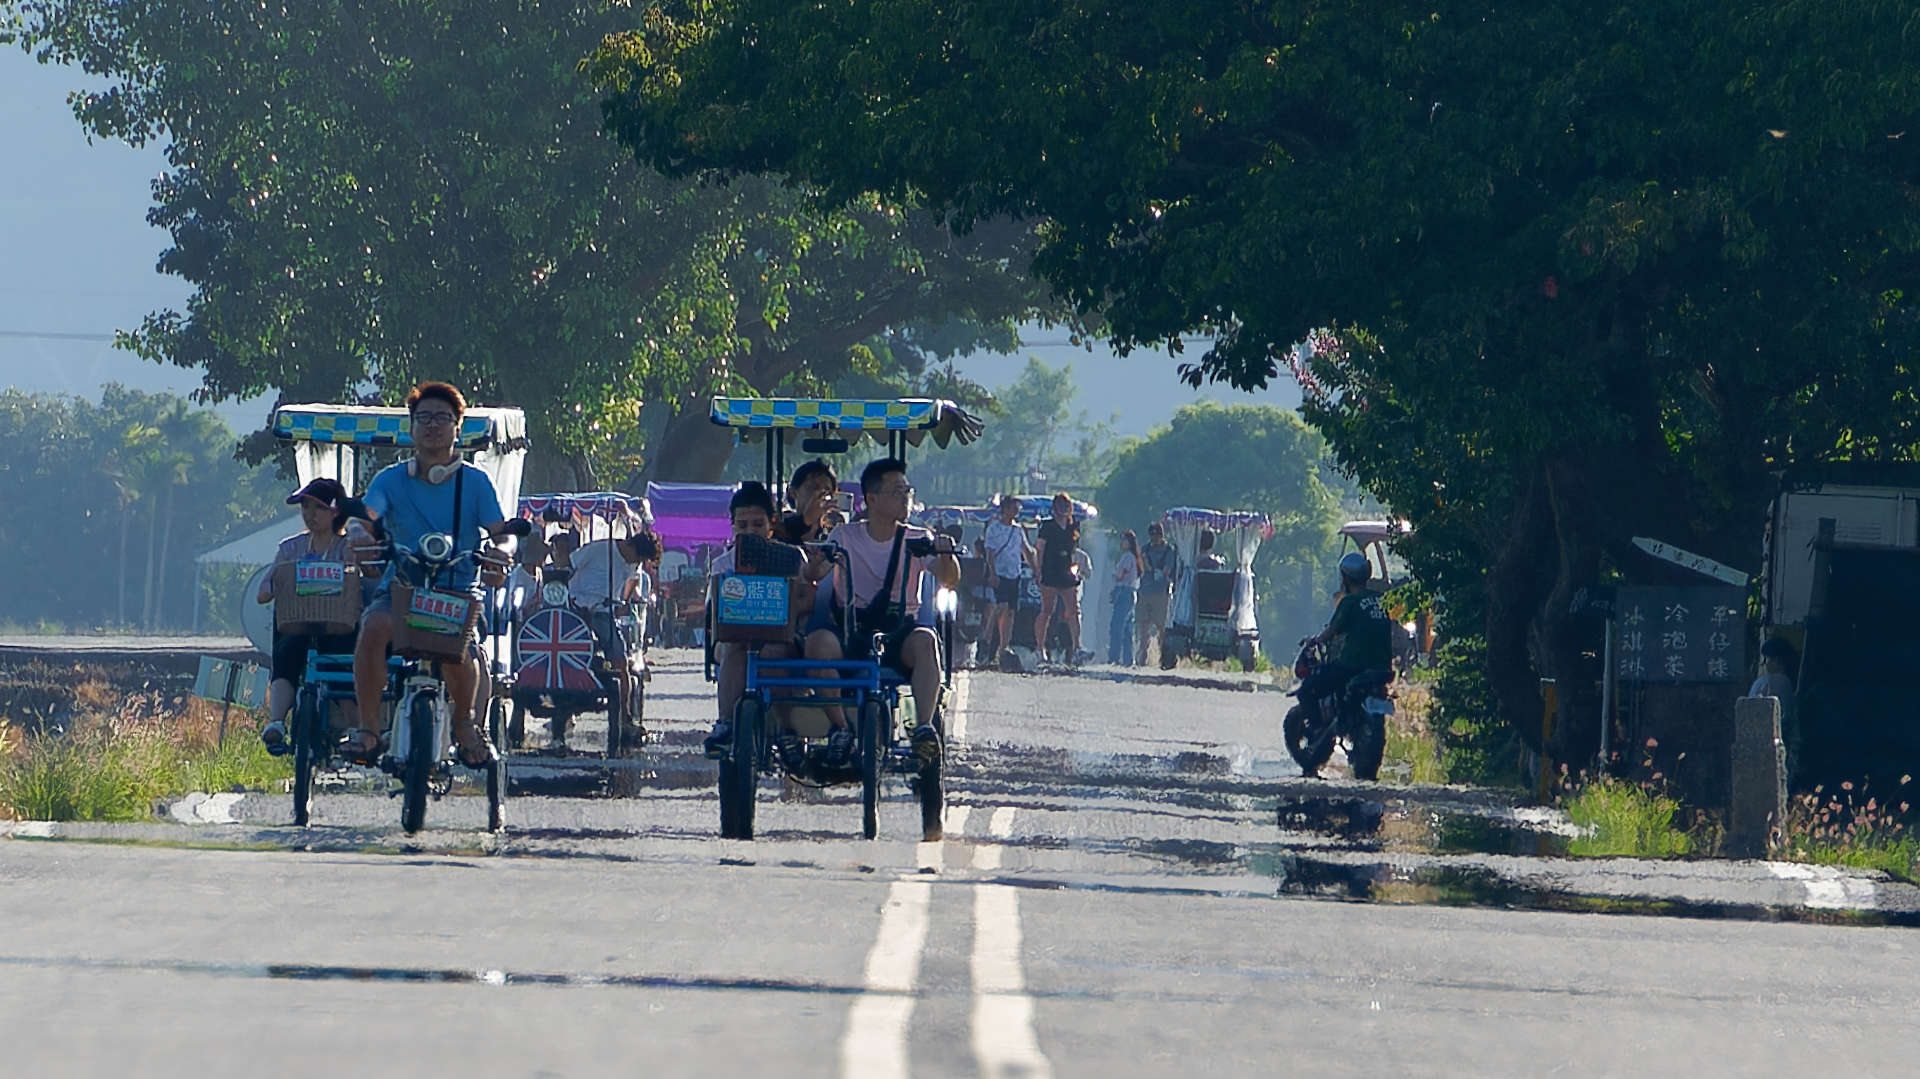 A telephoto shot of perhaps a dozen pedal- and electric-powered bikes and carts on a long country road.